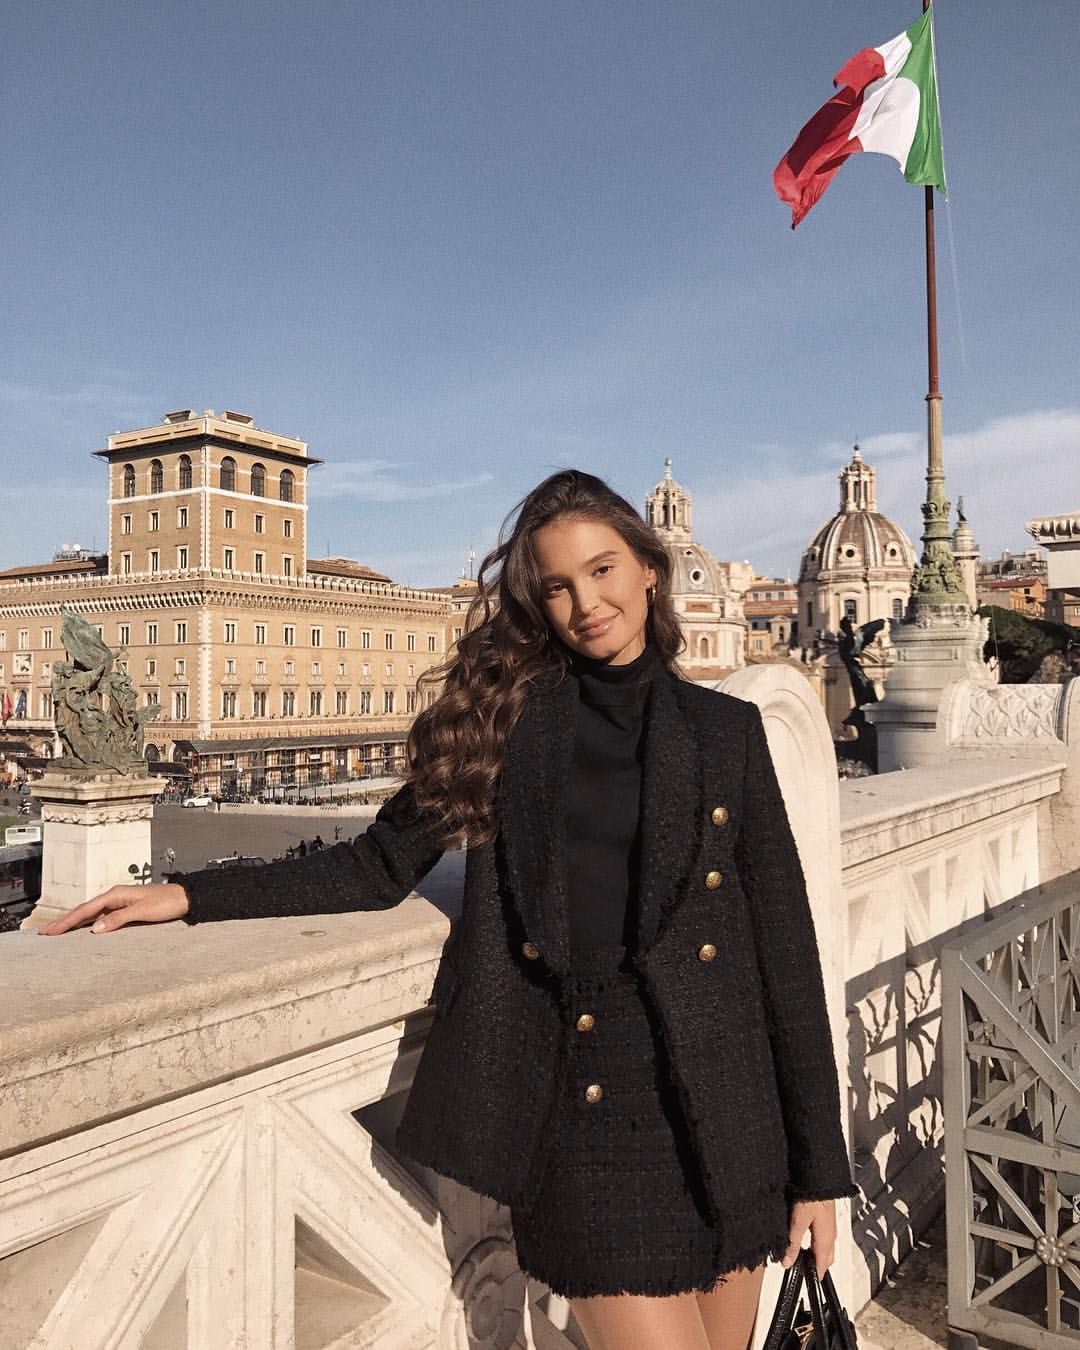 Woman in winter coat standing by cement railing with Italian flag in background